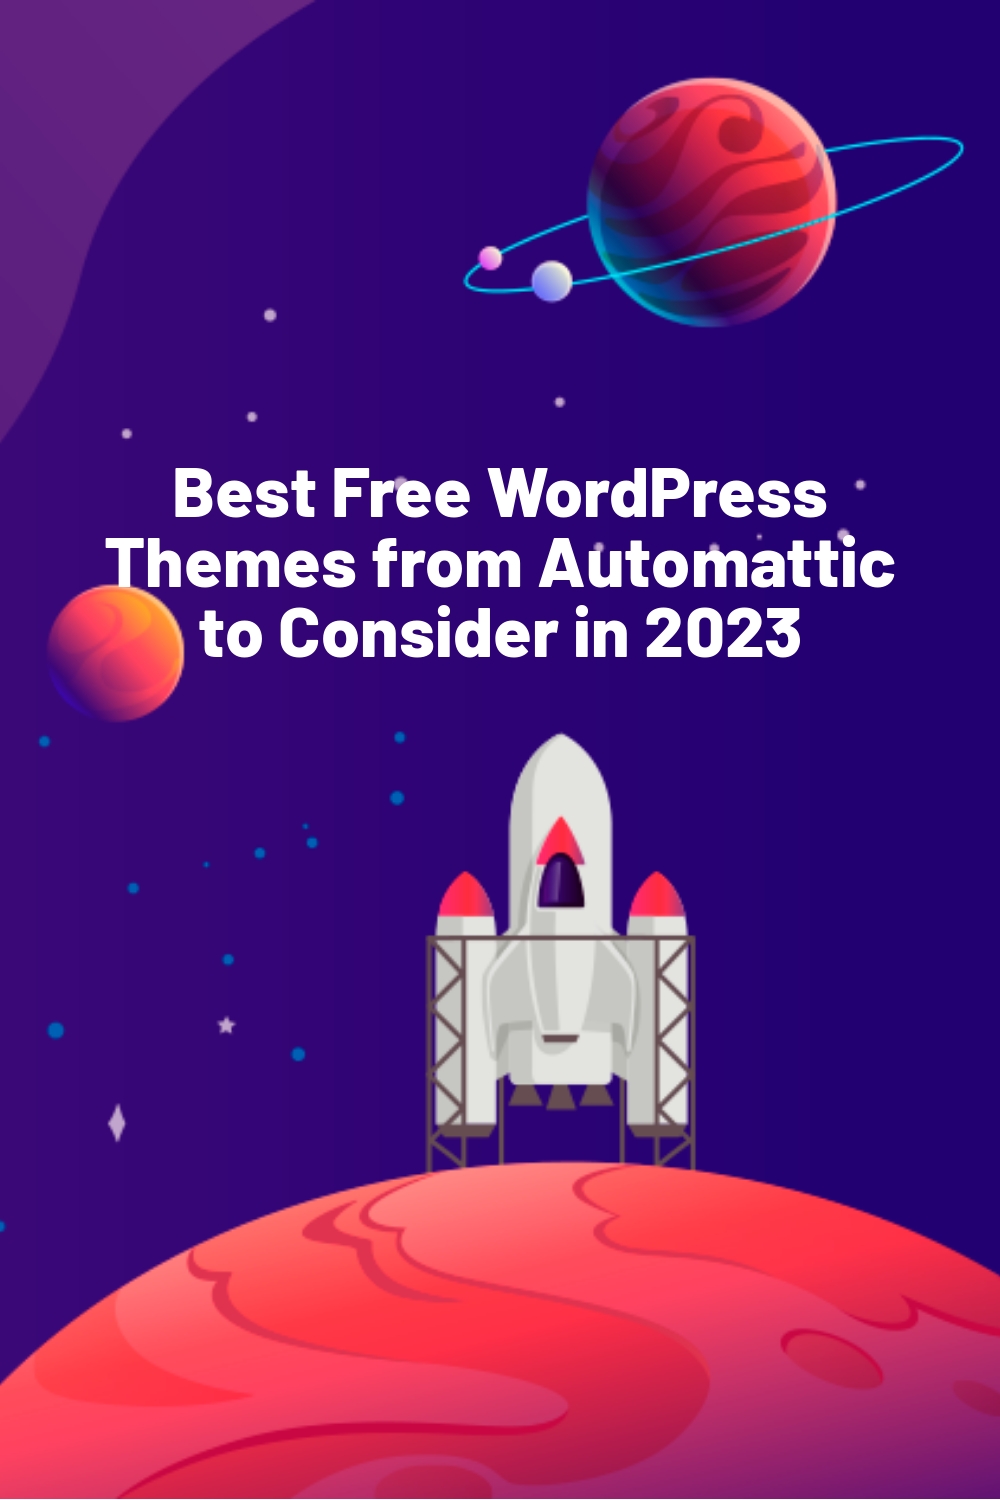 Best Free WordPress Themes from Automattic to Consider in 2023